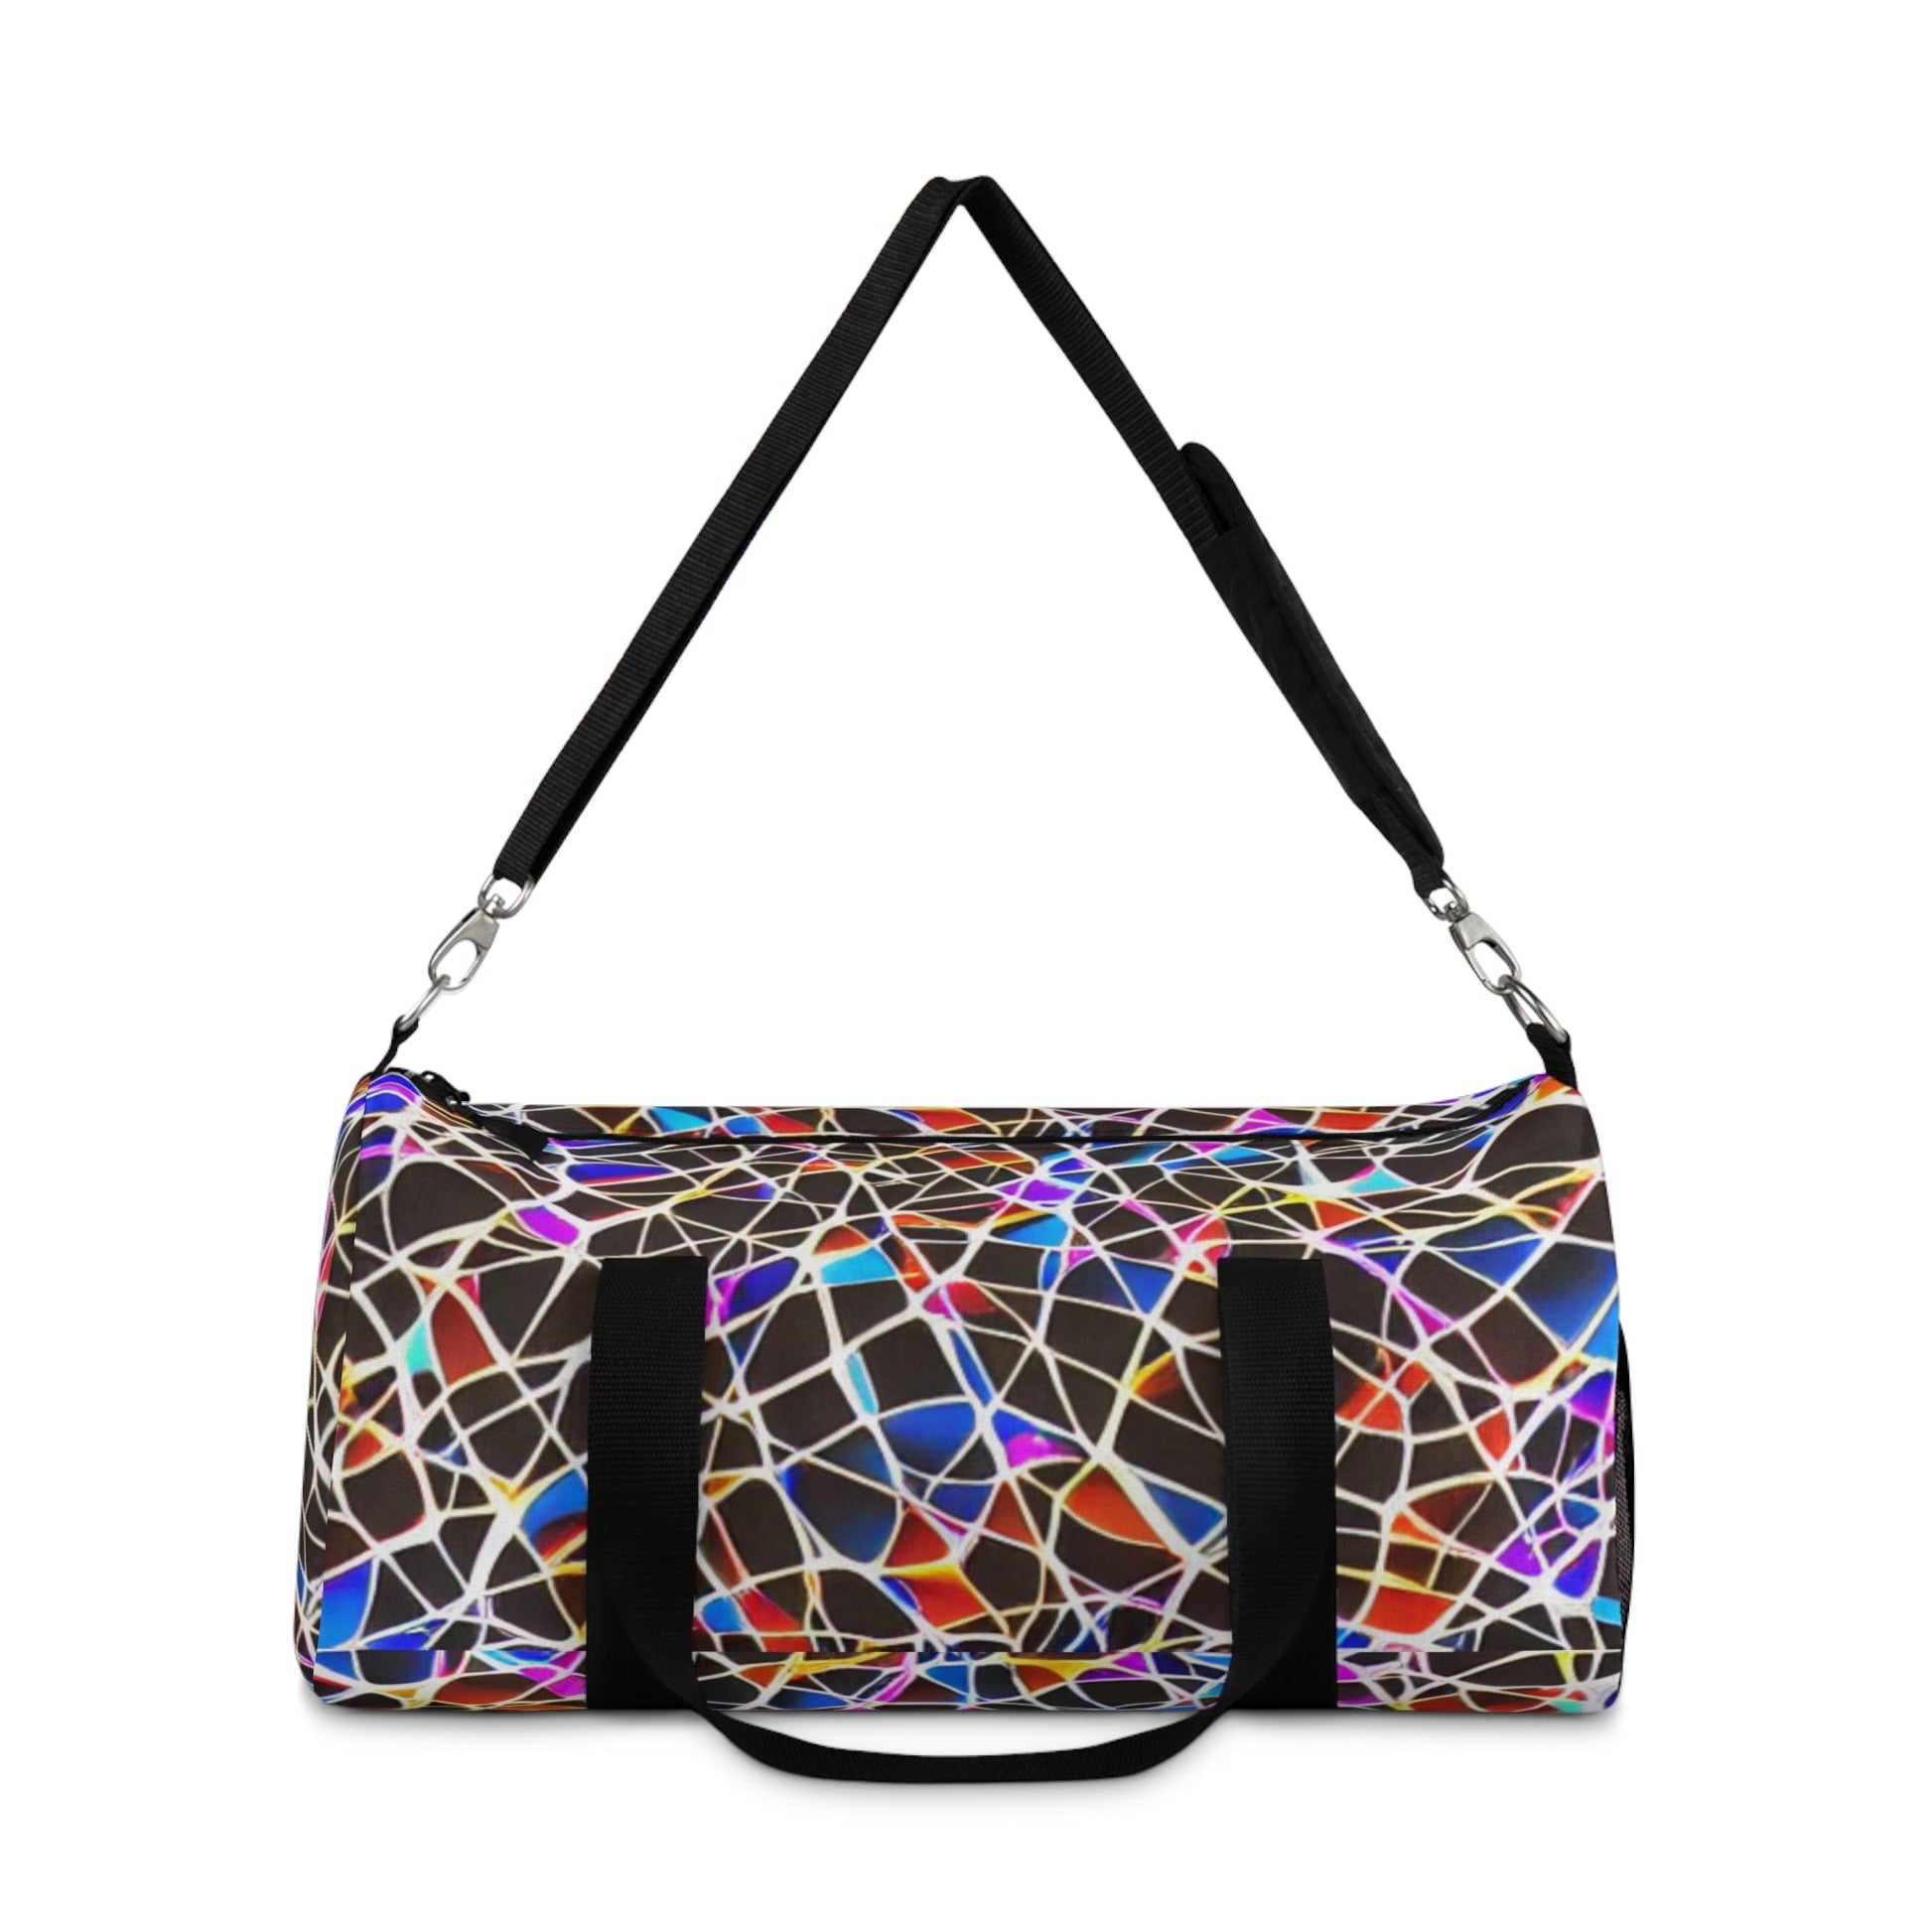 Duffel Bag Design with abstract shape and colors gym perfect-Shalav5